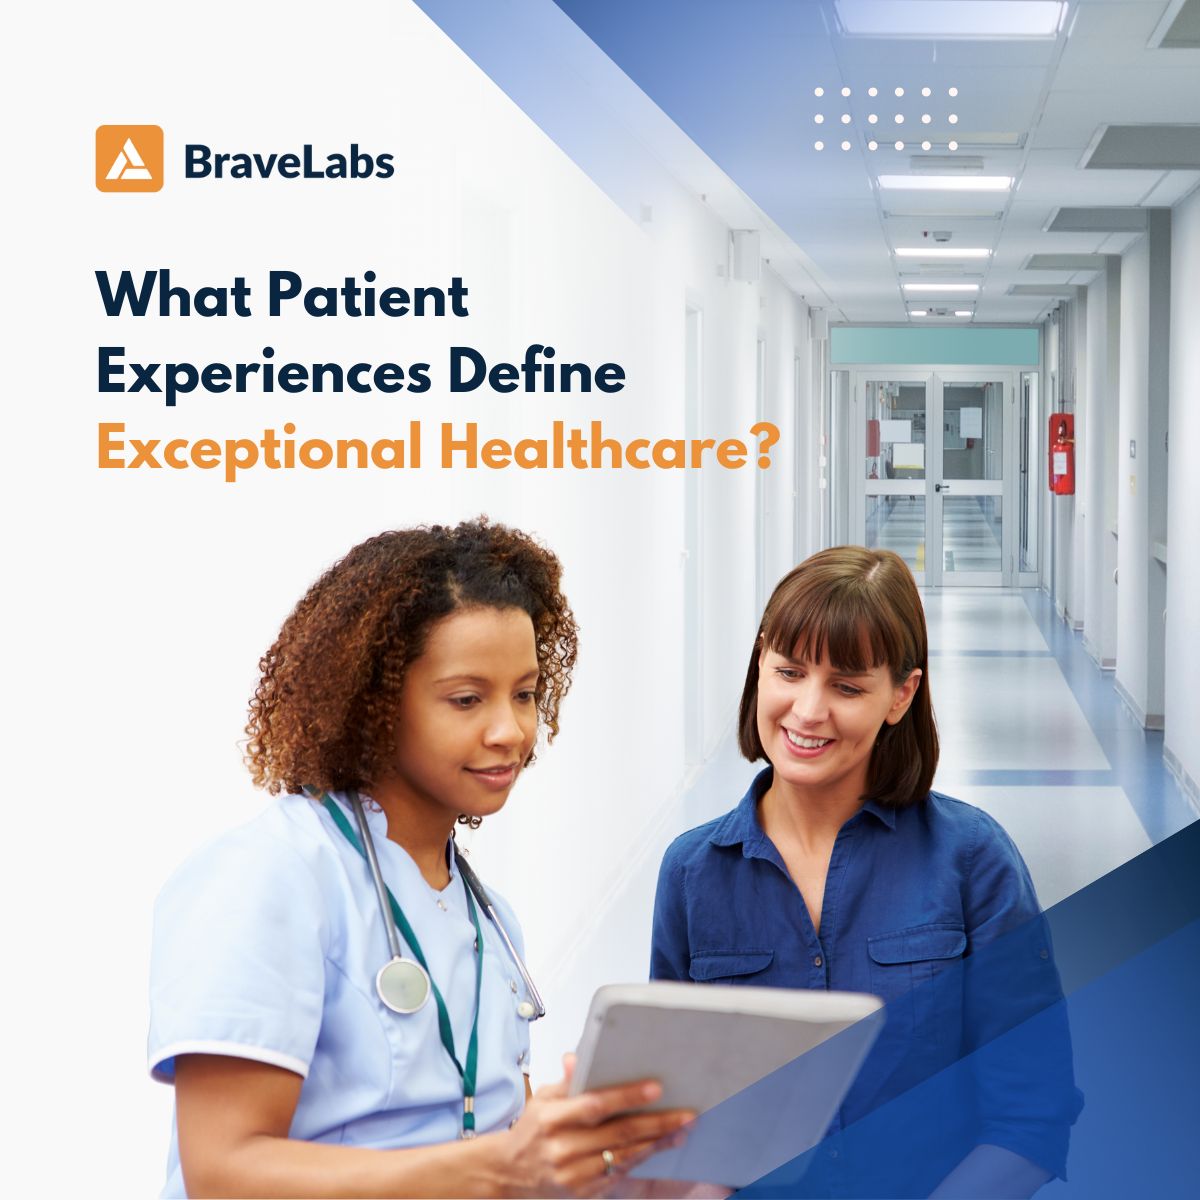 Share your perspective on the key elements of outstanding #patient experiences. #Healthcare providers, in your view, what are the defining moments that make #patientexperiences exceptional? Read more ➡️ thebravelabs.com/blog/top-reaso…

#digitalhealth #hospital #doctor #Medical #smm #SEO